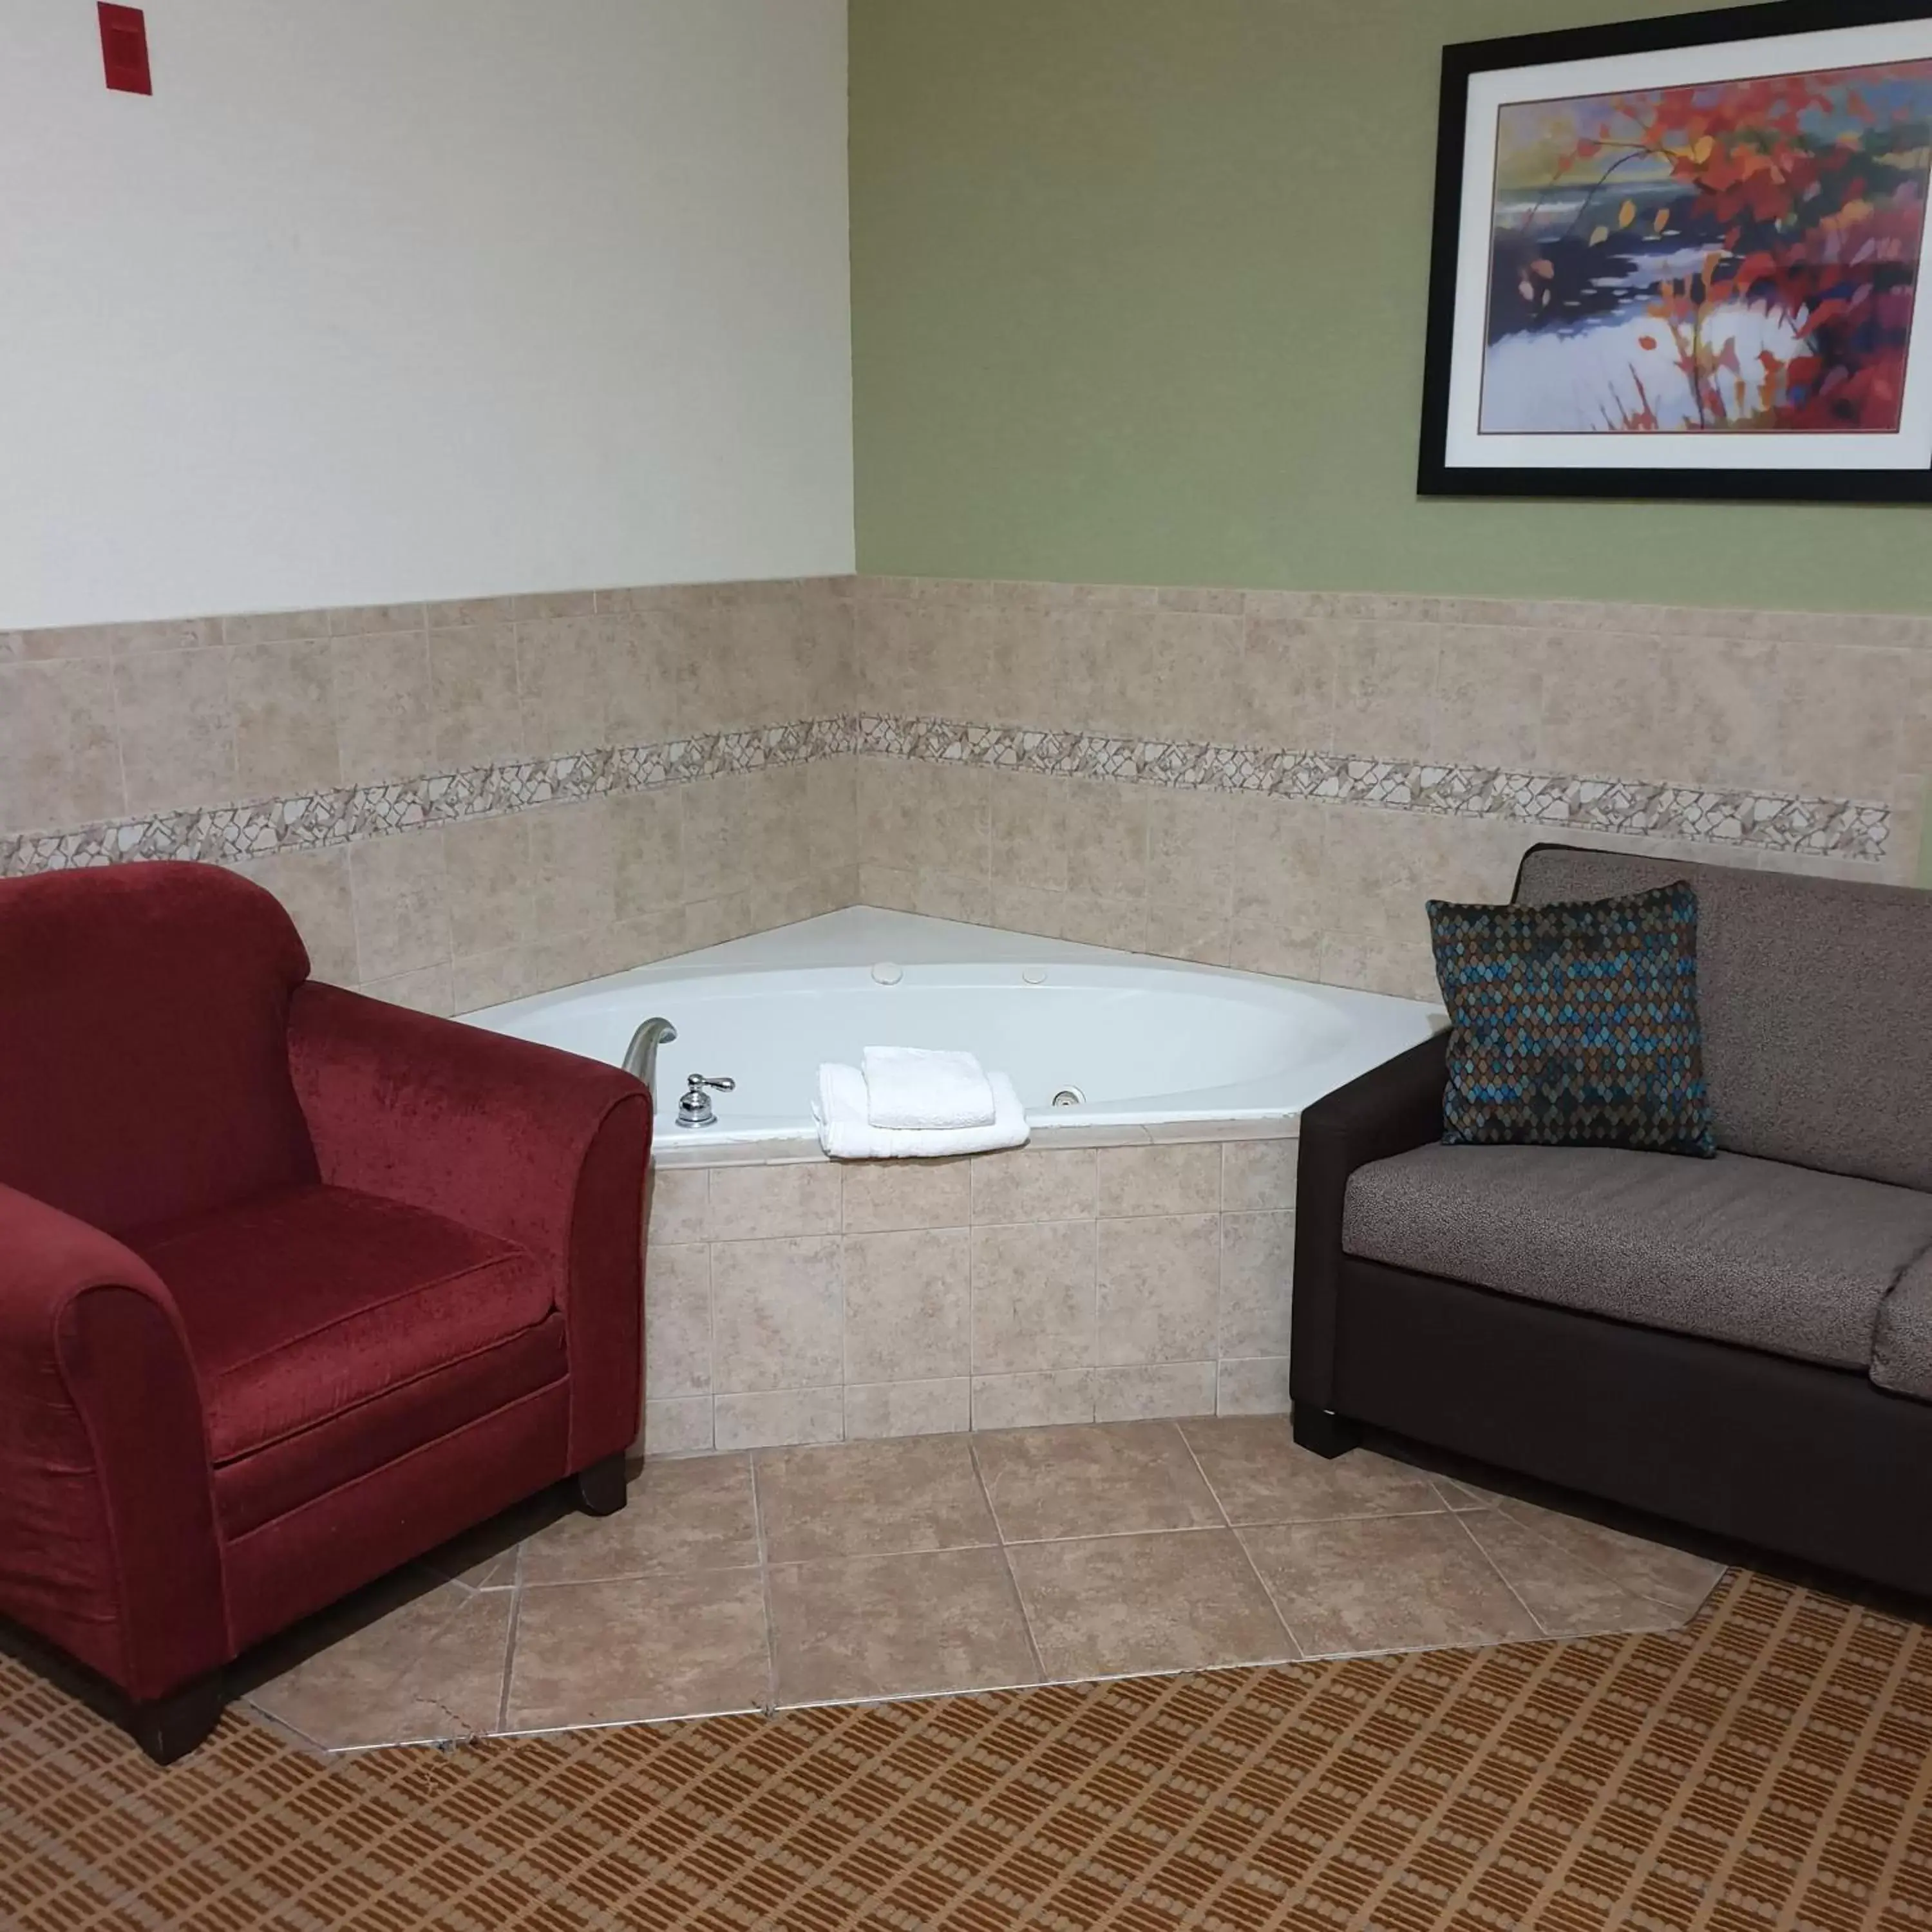 Seating Area in Hawthorn Suites by Wyndham - Kingsland, I-95 & Kings Bay Naval Base Area